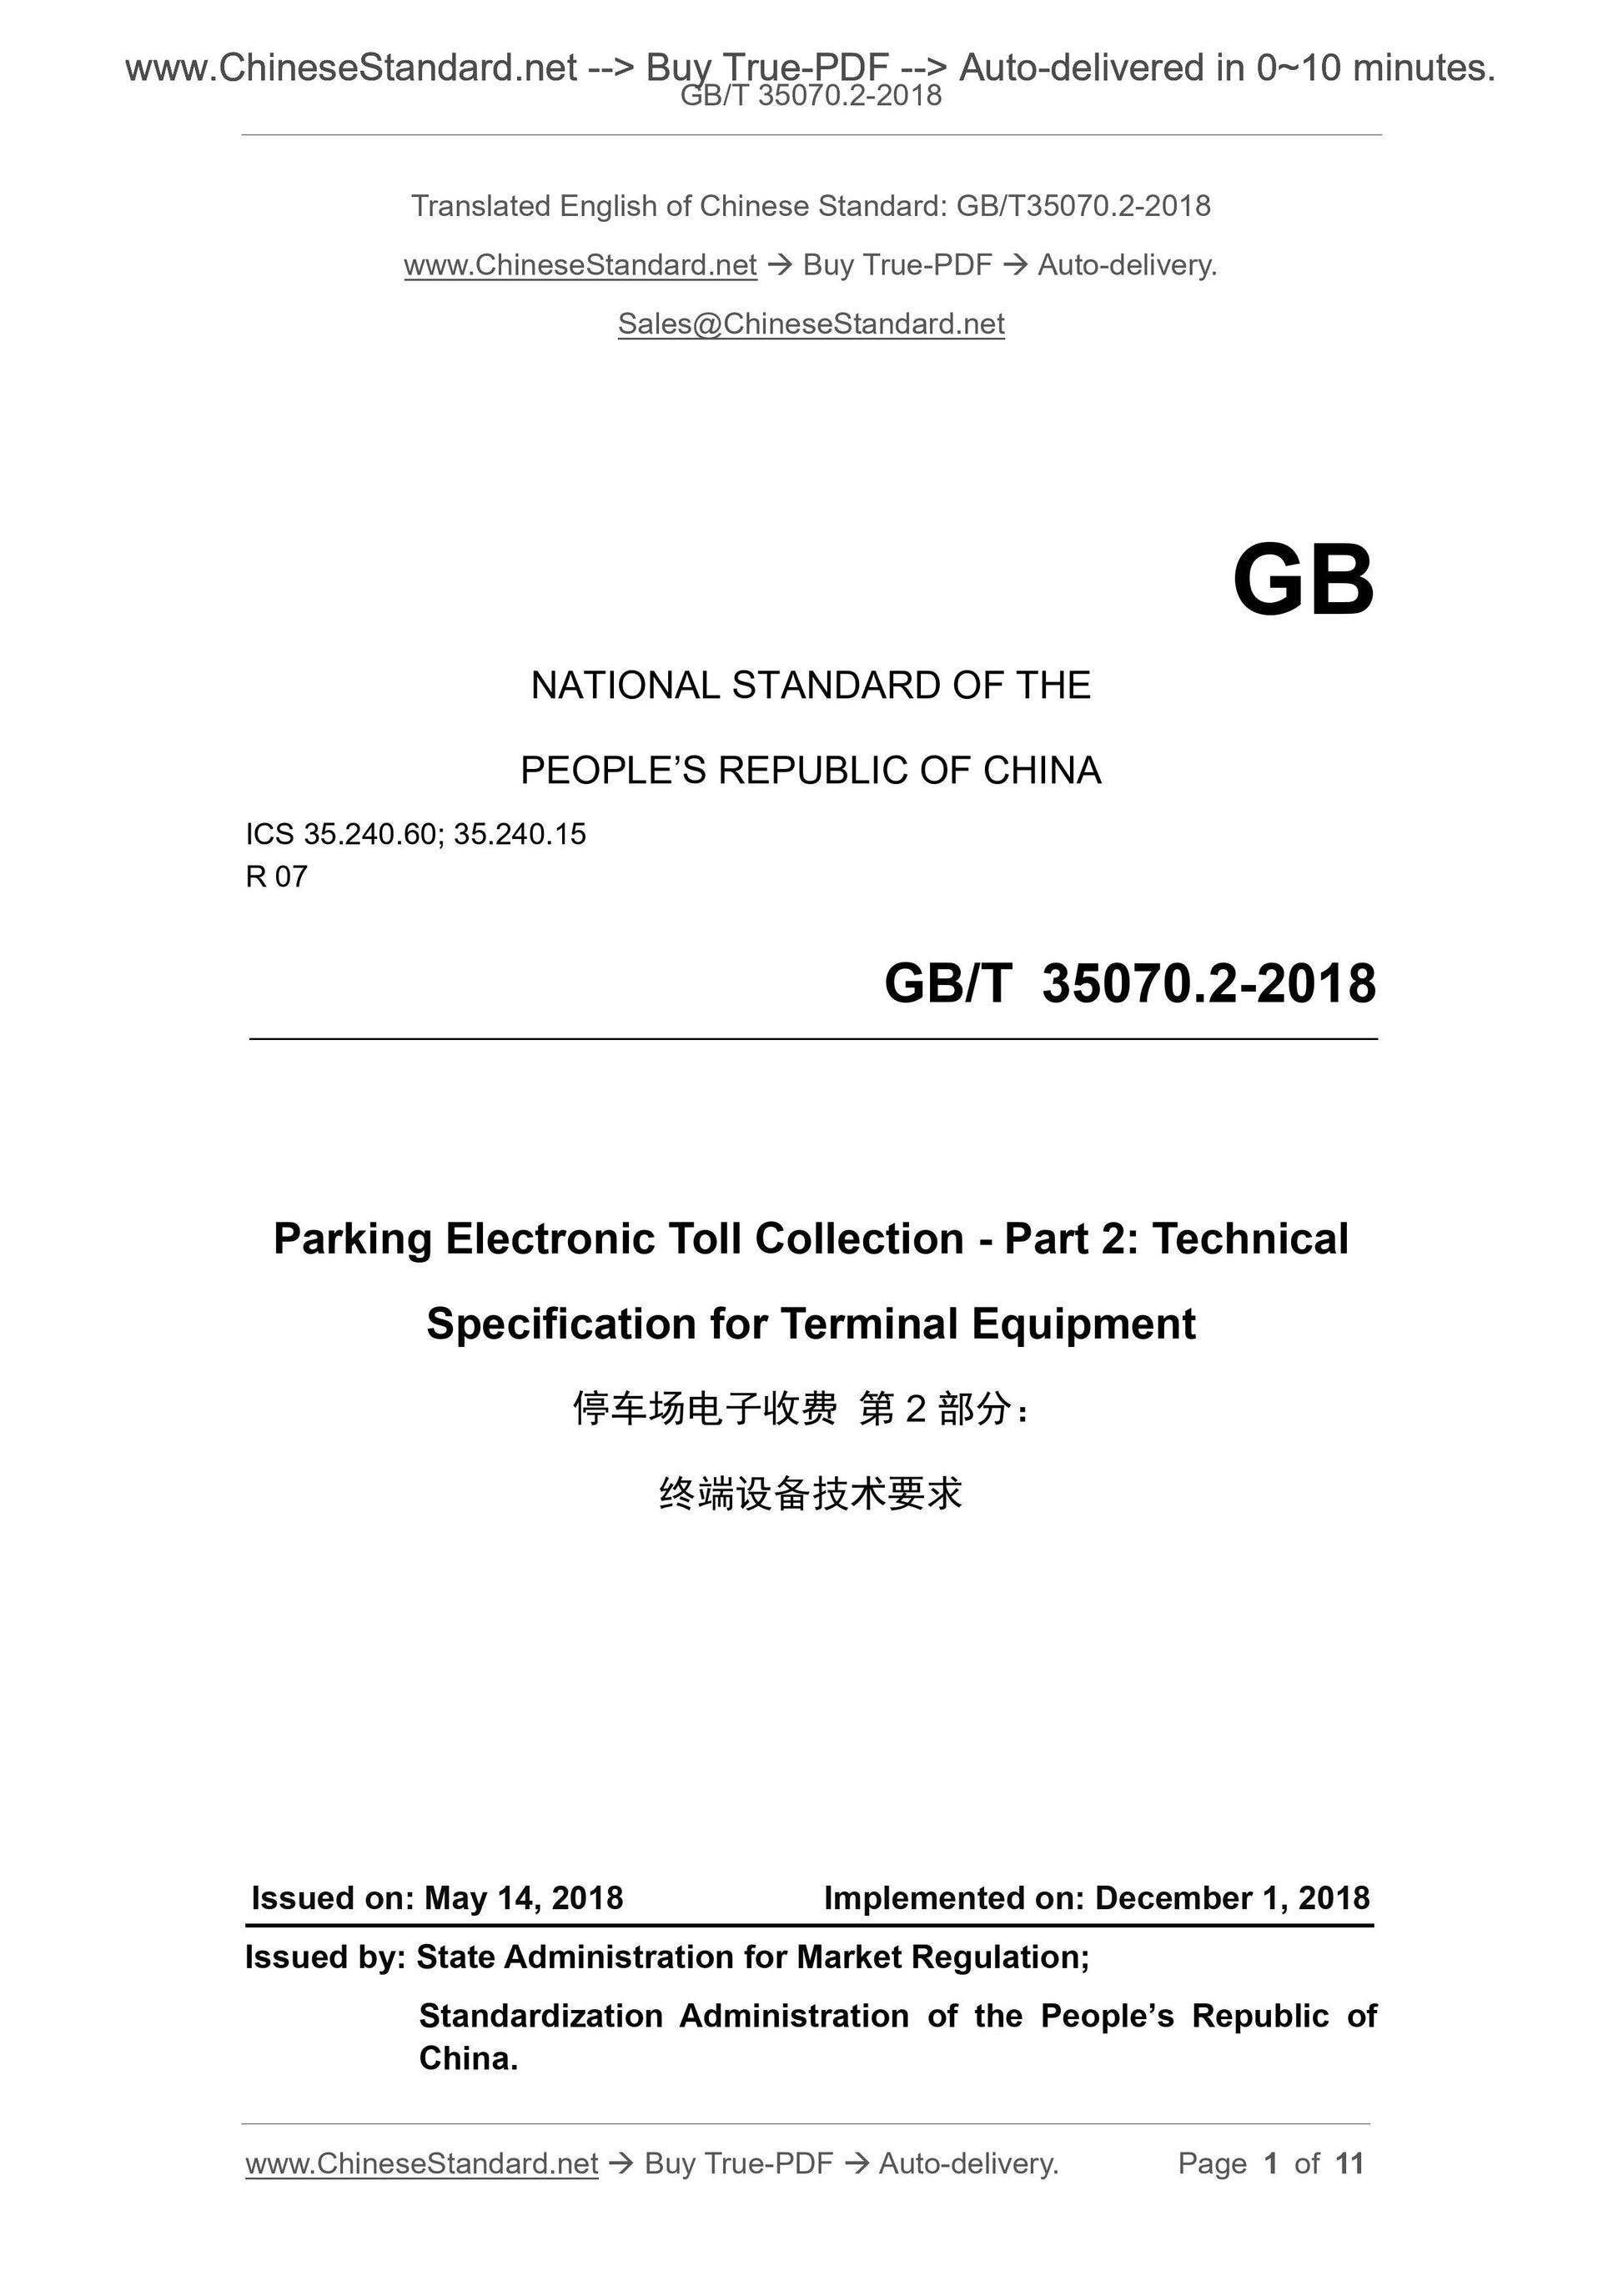 GB/T 35070.2-2018 Page 1